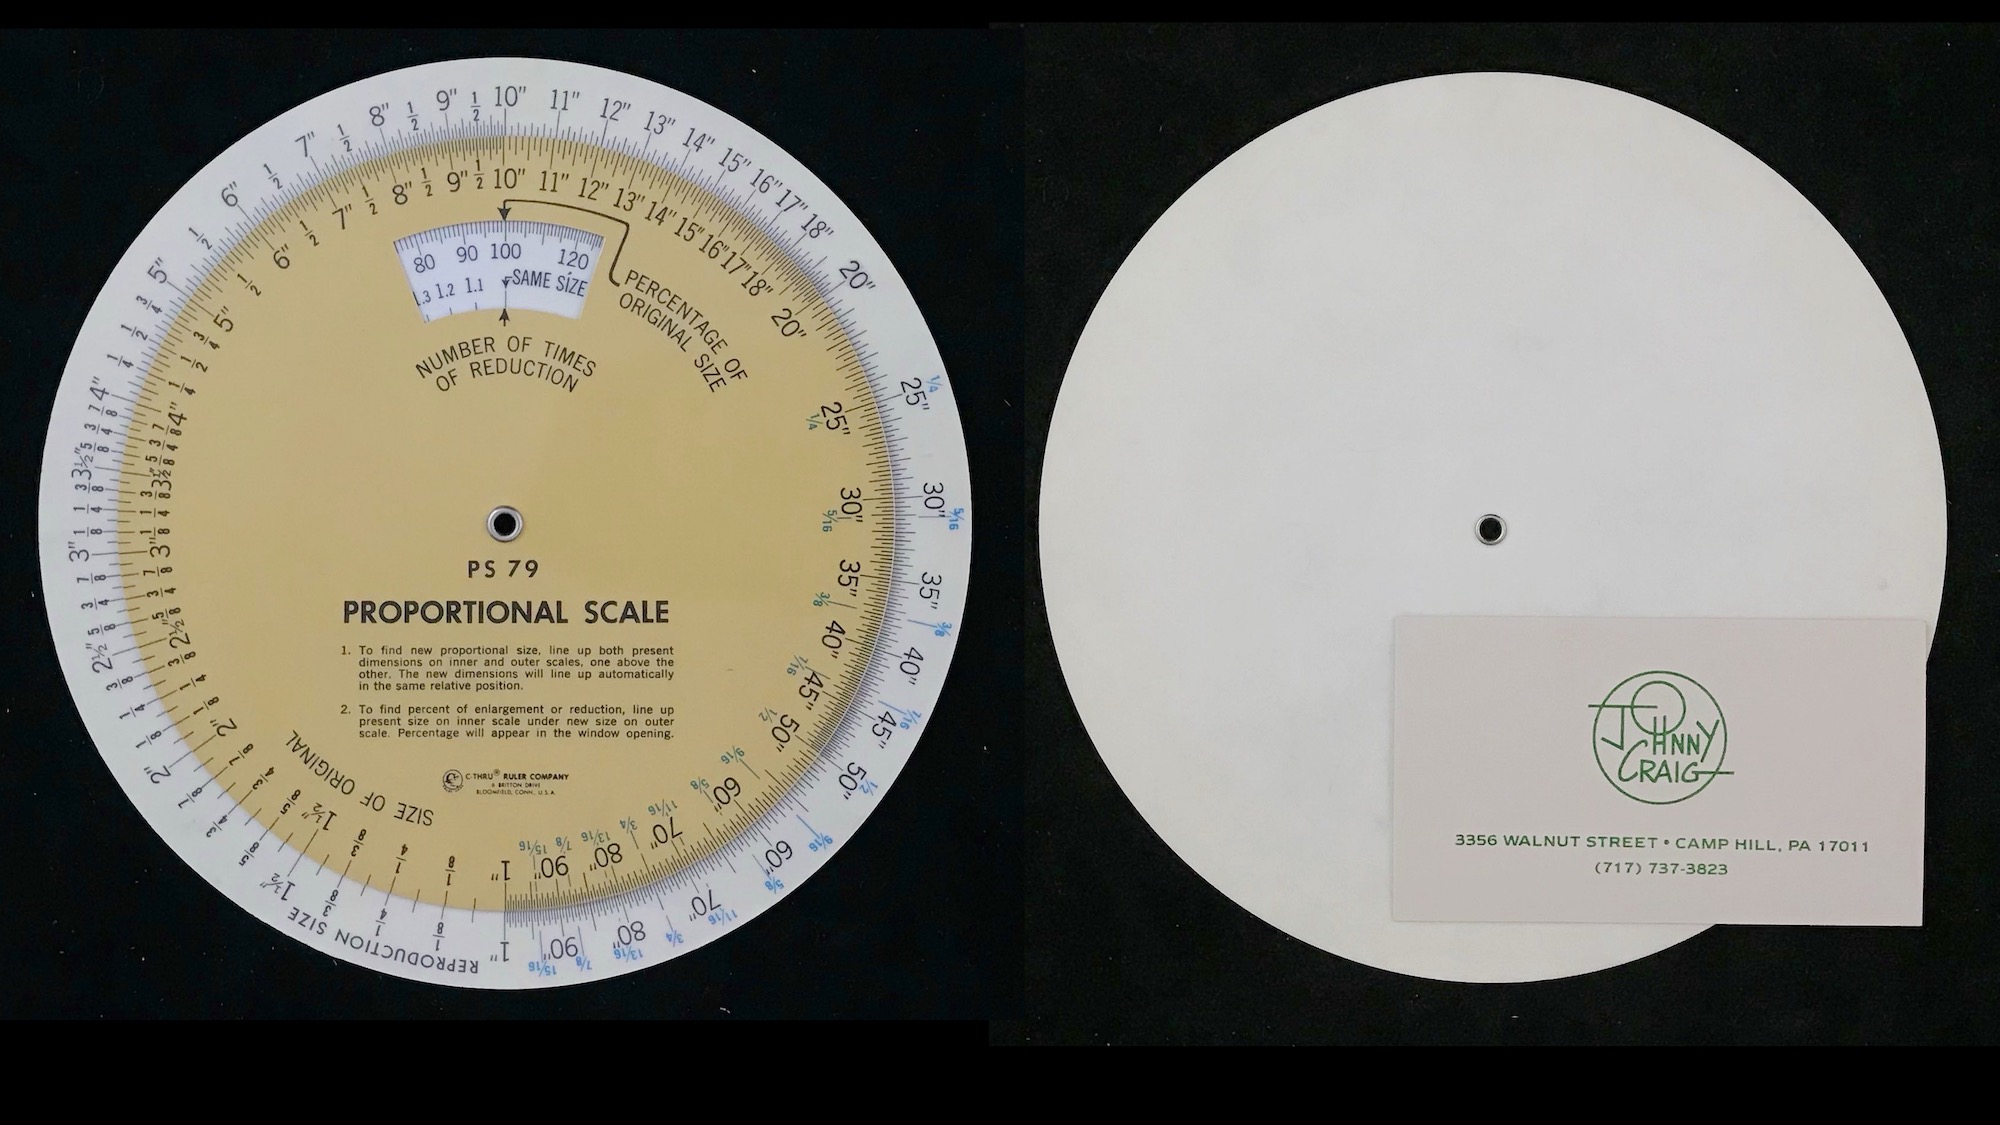 Johnny Craig’s Proportional Scale, c. 1970, Model PS-79 by C-Thru Ruler Company, USA.